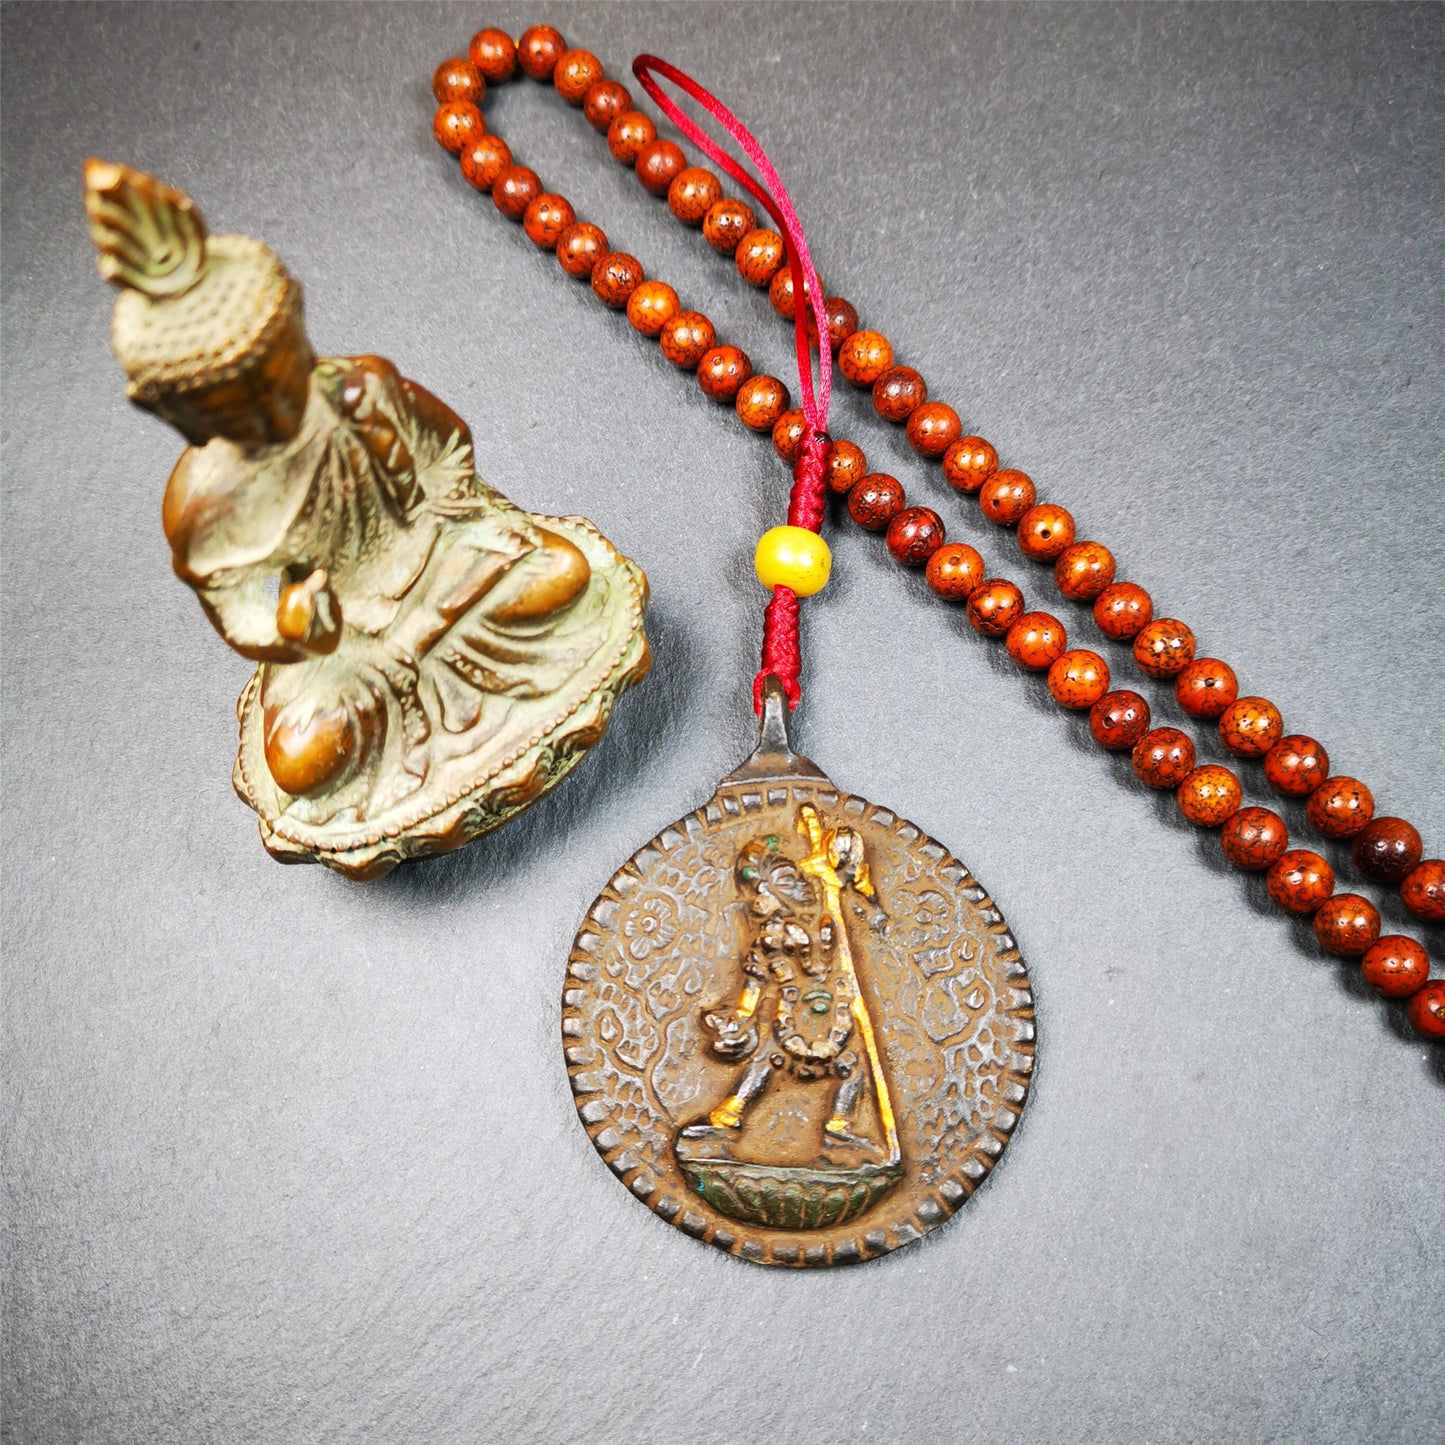 This unique Troma Nagmo Melong Amulet was collected from Goinqên Monastery,about 40 years old,consecrated and blessed by lama. It is round shape,made of thokcha,2.2 inch diameter,the front pattern is Tibetan Budhist calendar symbol - SIPAHO(srid pa ho),and the back is Troma Nagmo. You can make it into pendant or keychain, or just put it on your desk,as an ornament.